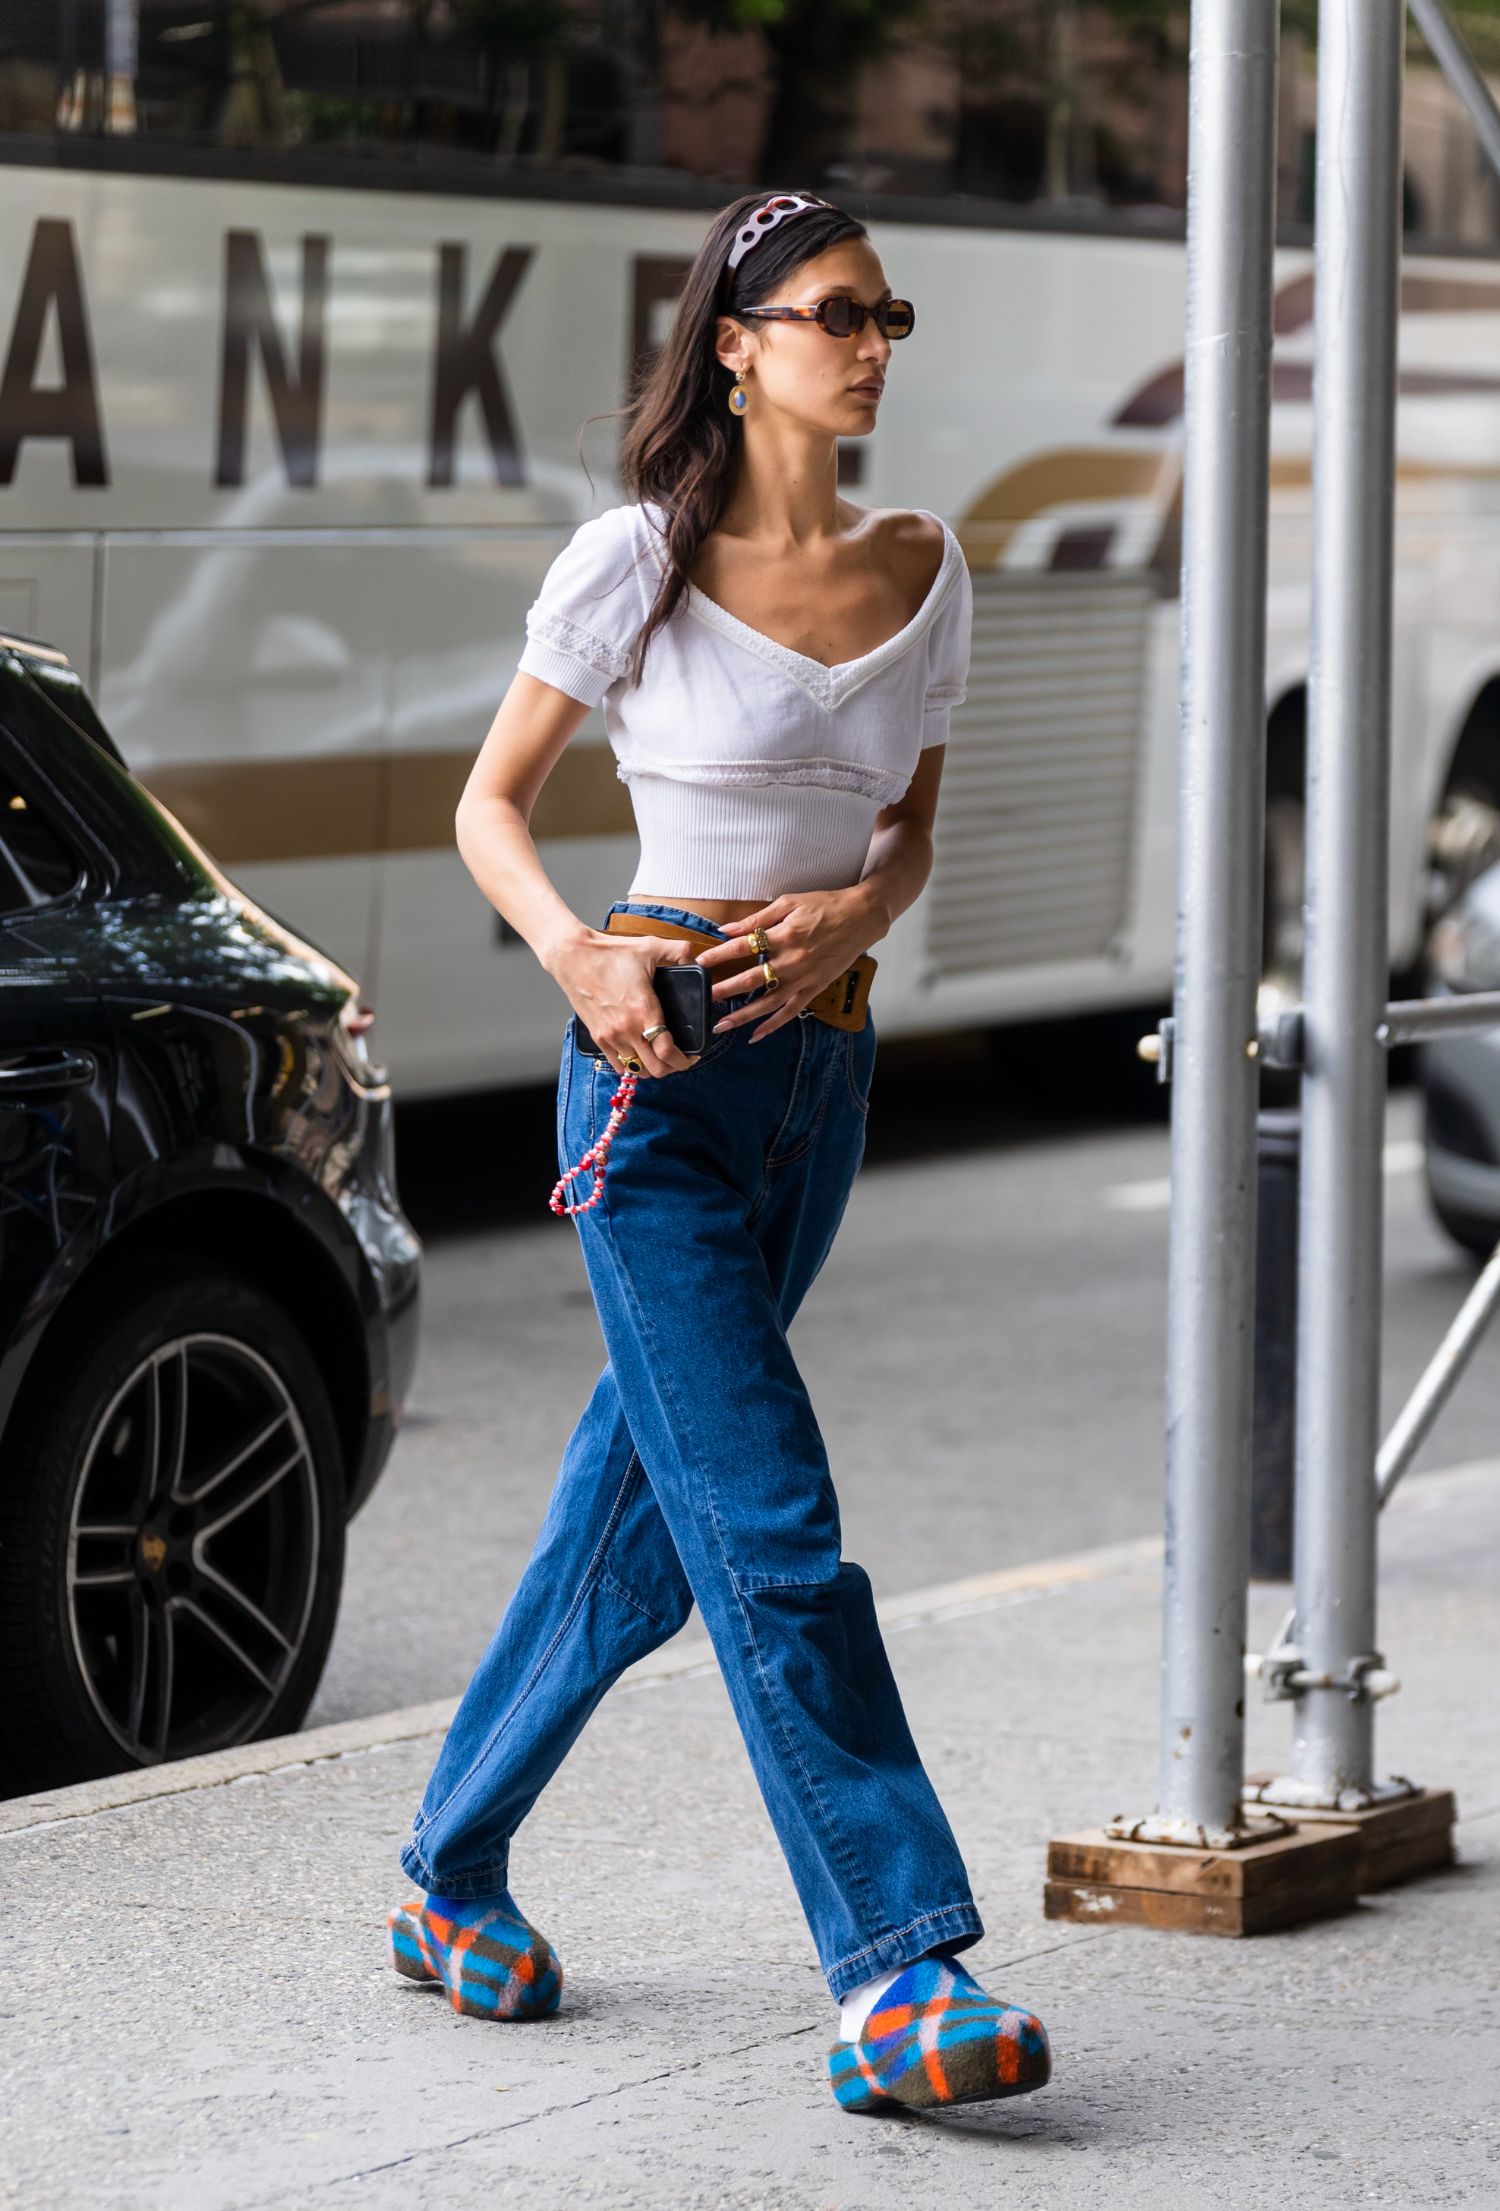 Bella Hadid in White Cropped Top, Eytys Titan Tuck Stone Blue Jeans, Simon Miller Plaid Bubble Clogs, Dmy by Dmy Valentina Sunglasses